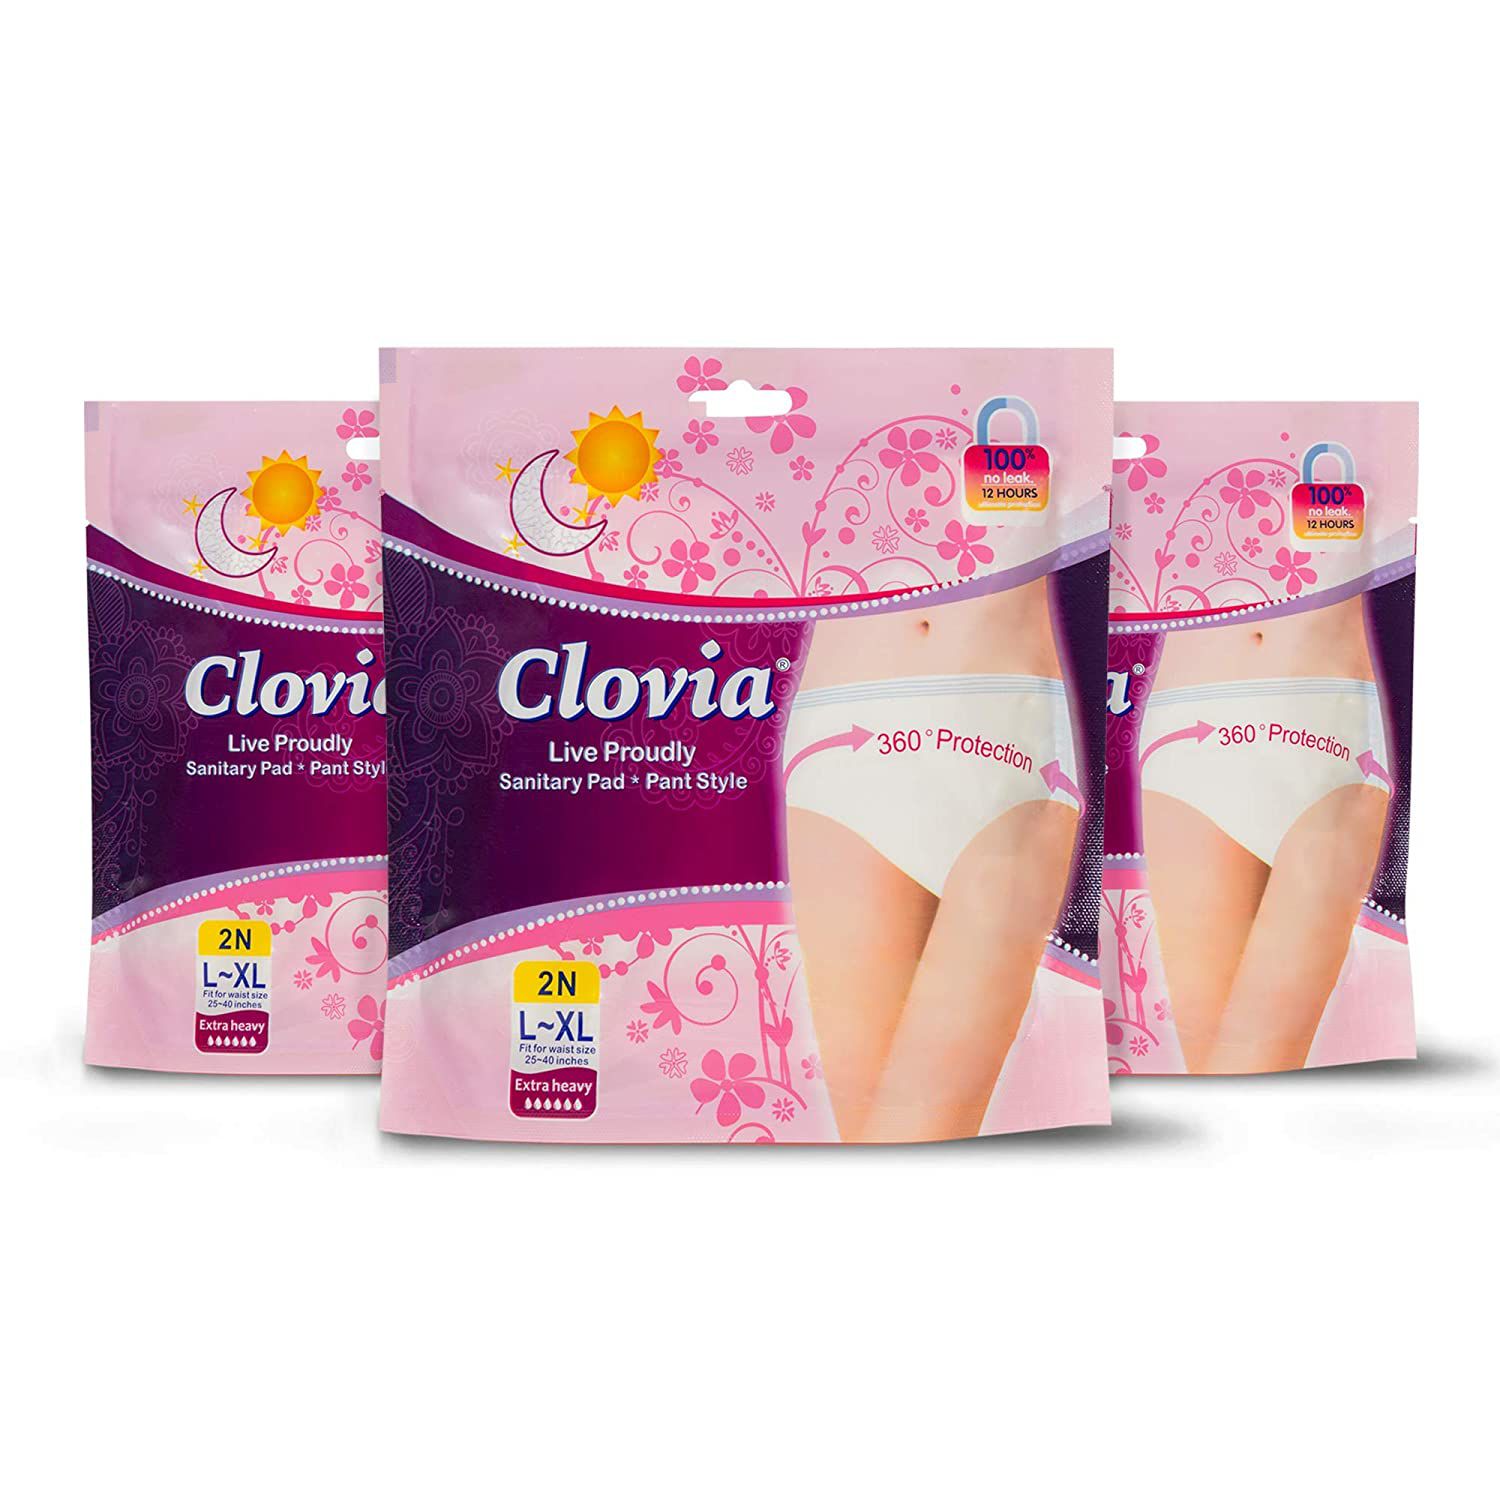 Clovia Heavy Flow Disposable Period Panties for Sanitary Protection L - XL (3 Pack - 6 Panties) | Sanitary Pads Pant Style